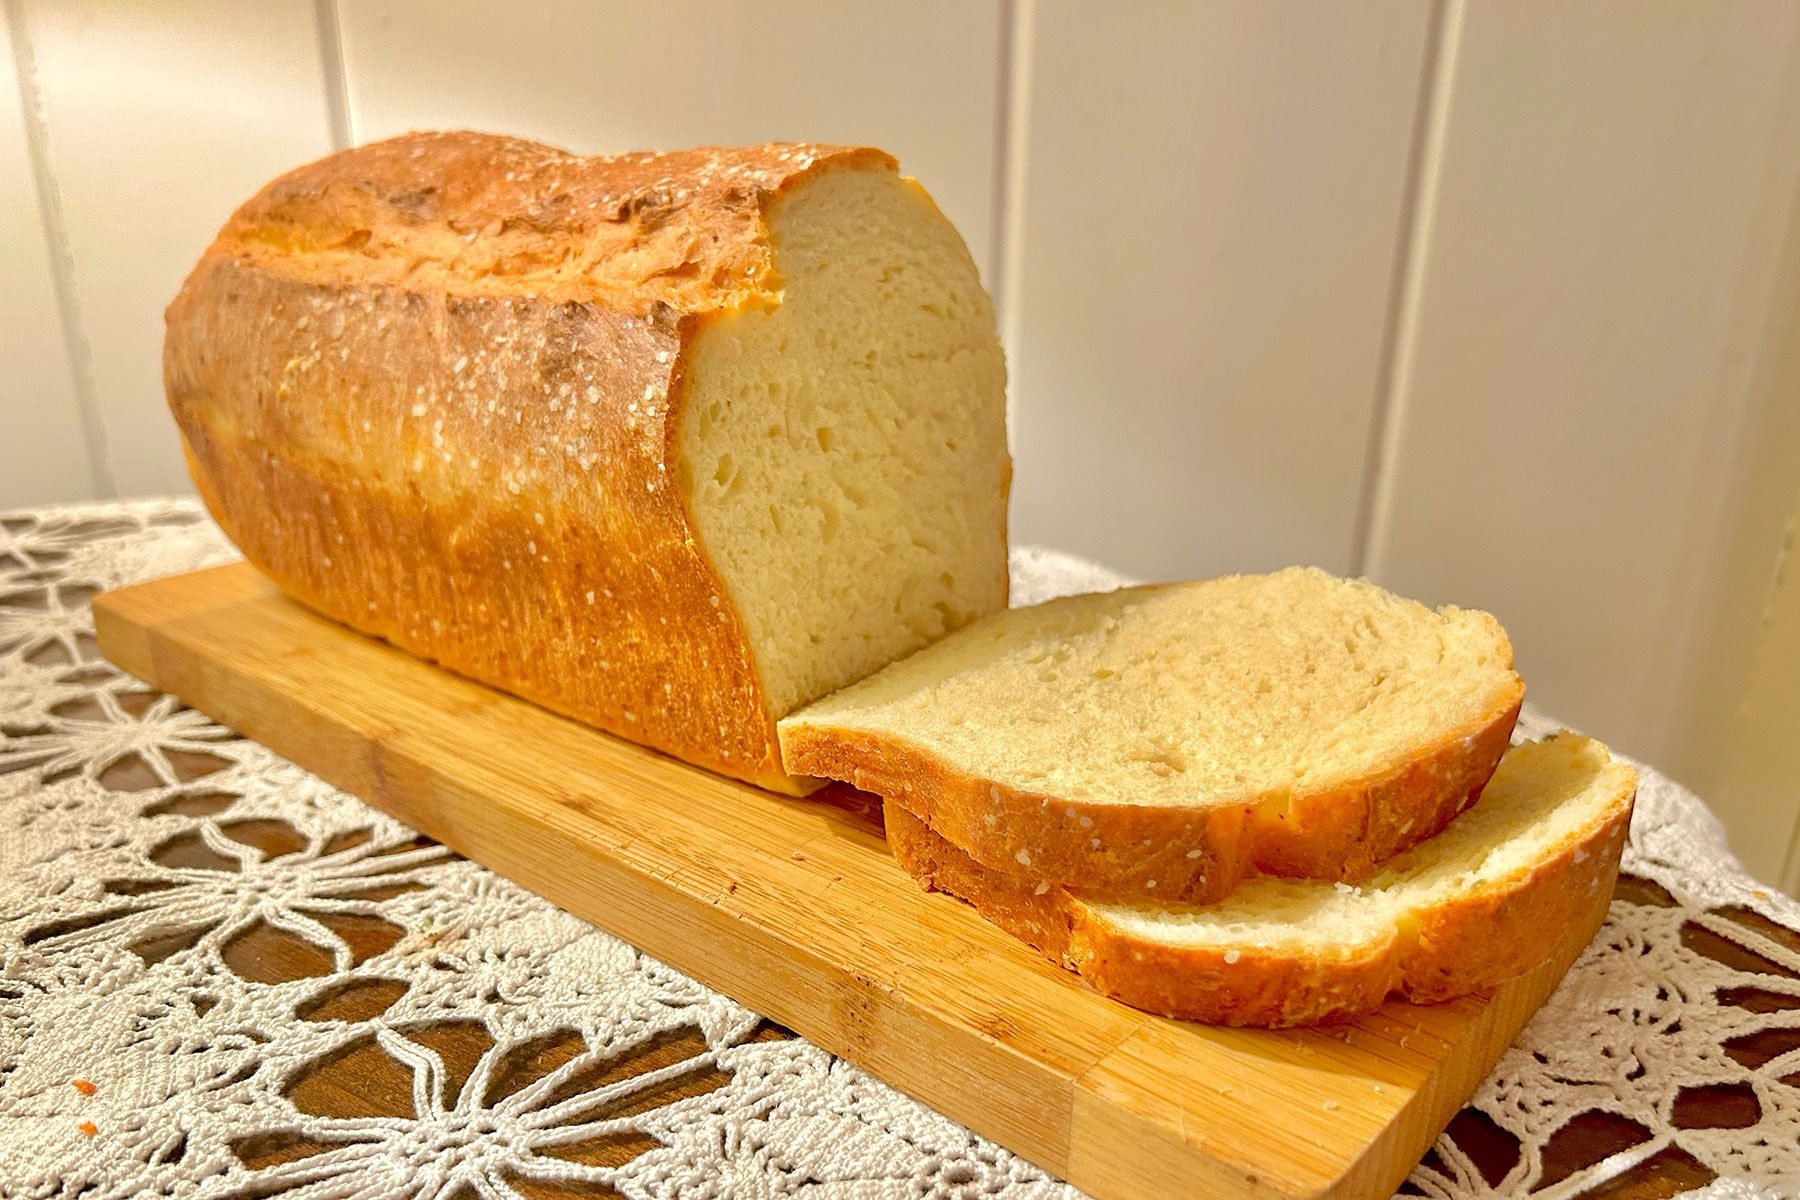 https://www.tasteofhome.com/wp-content/uploads/2023/05/Sliced-Cottage-Cheese-Bread-Jason-Wilson-Resize-Recolor-Crop-DH-TOH.jpg